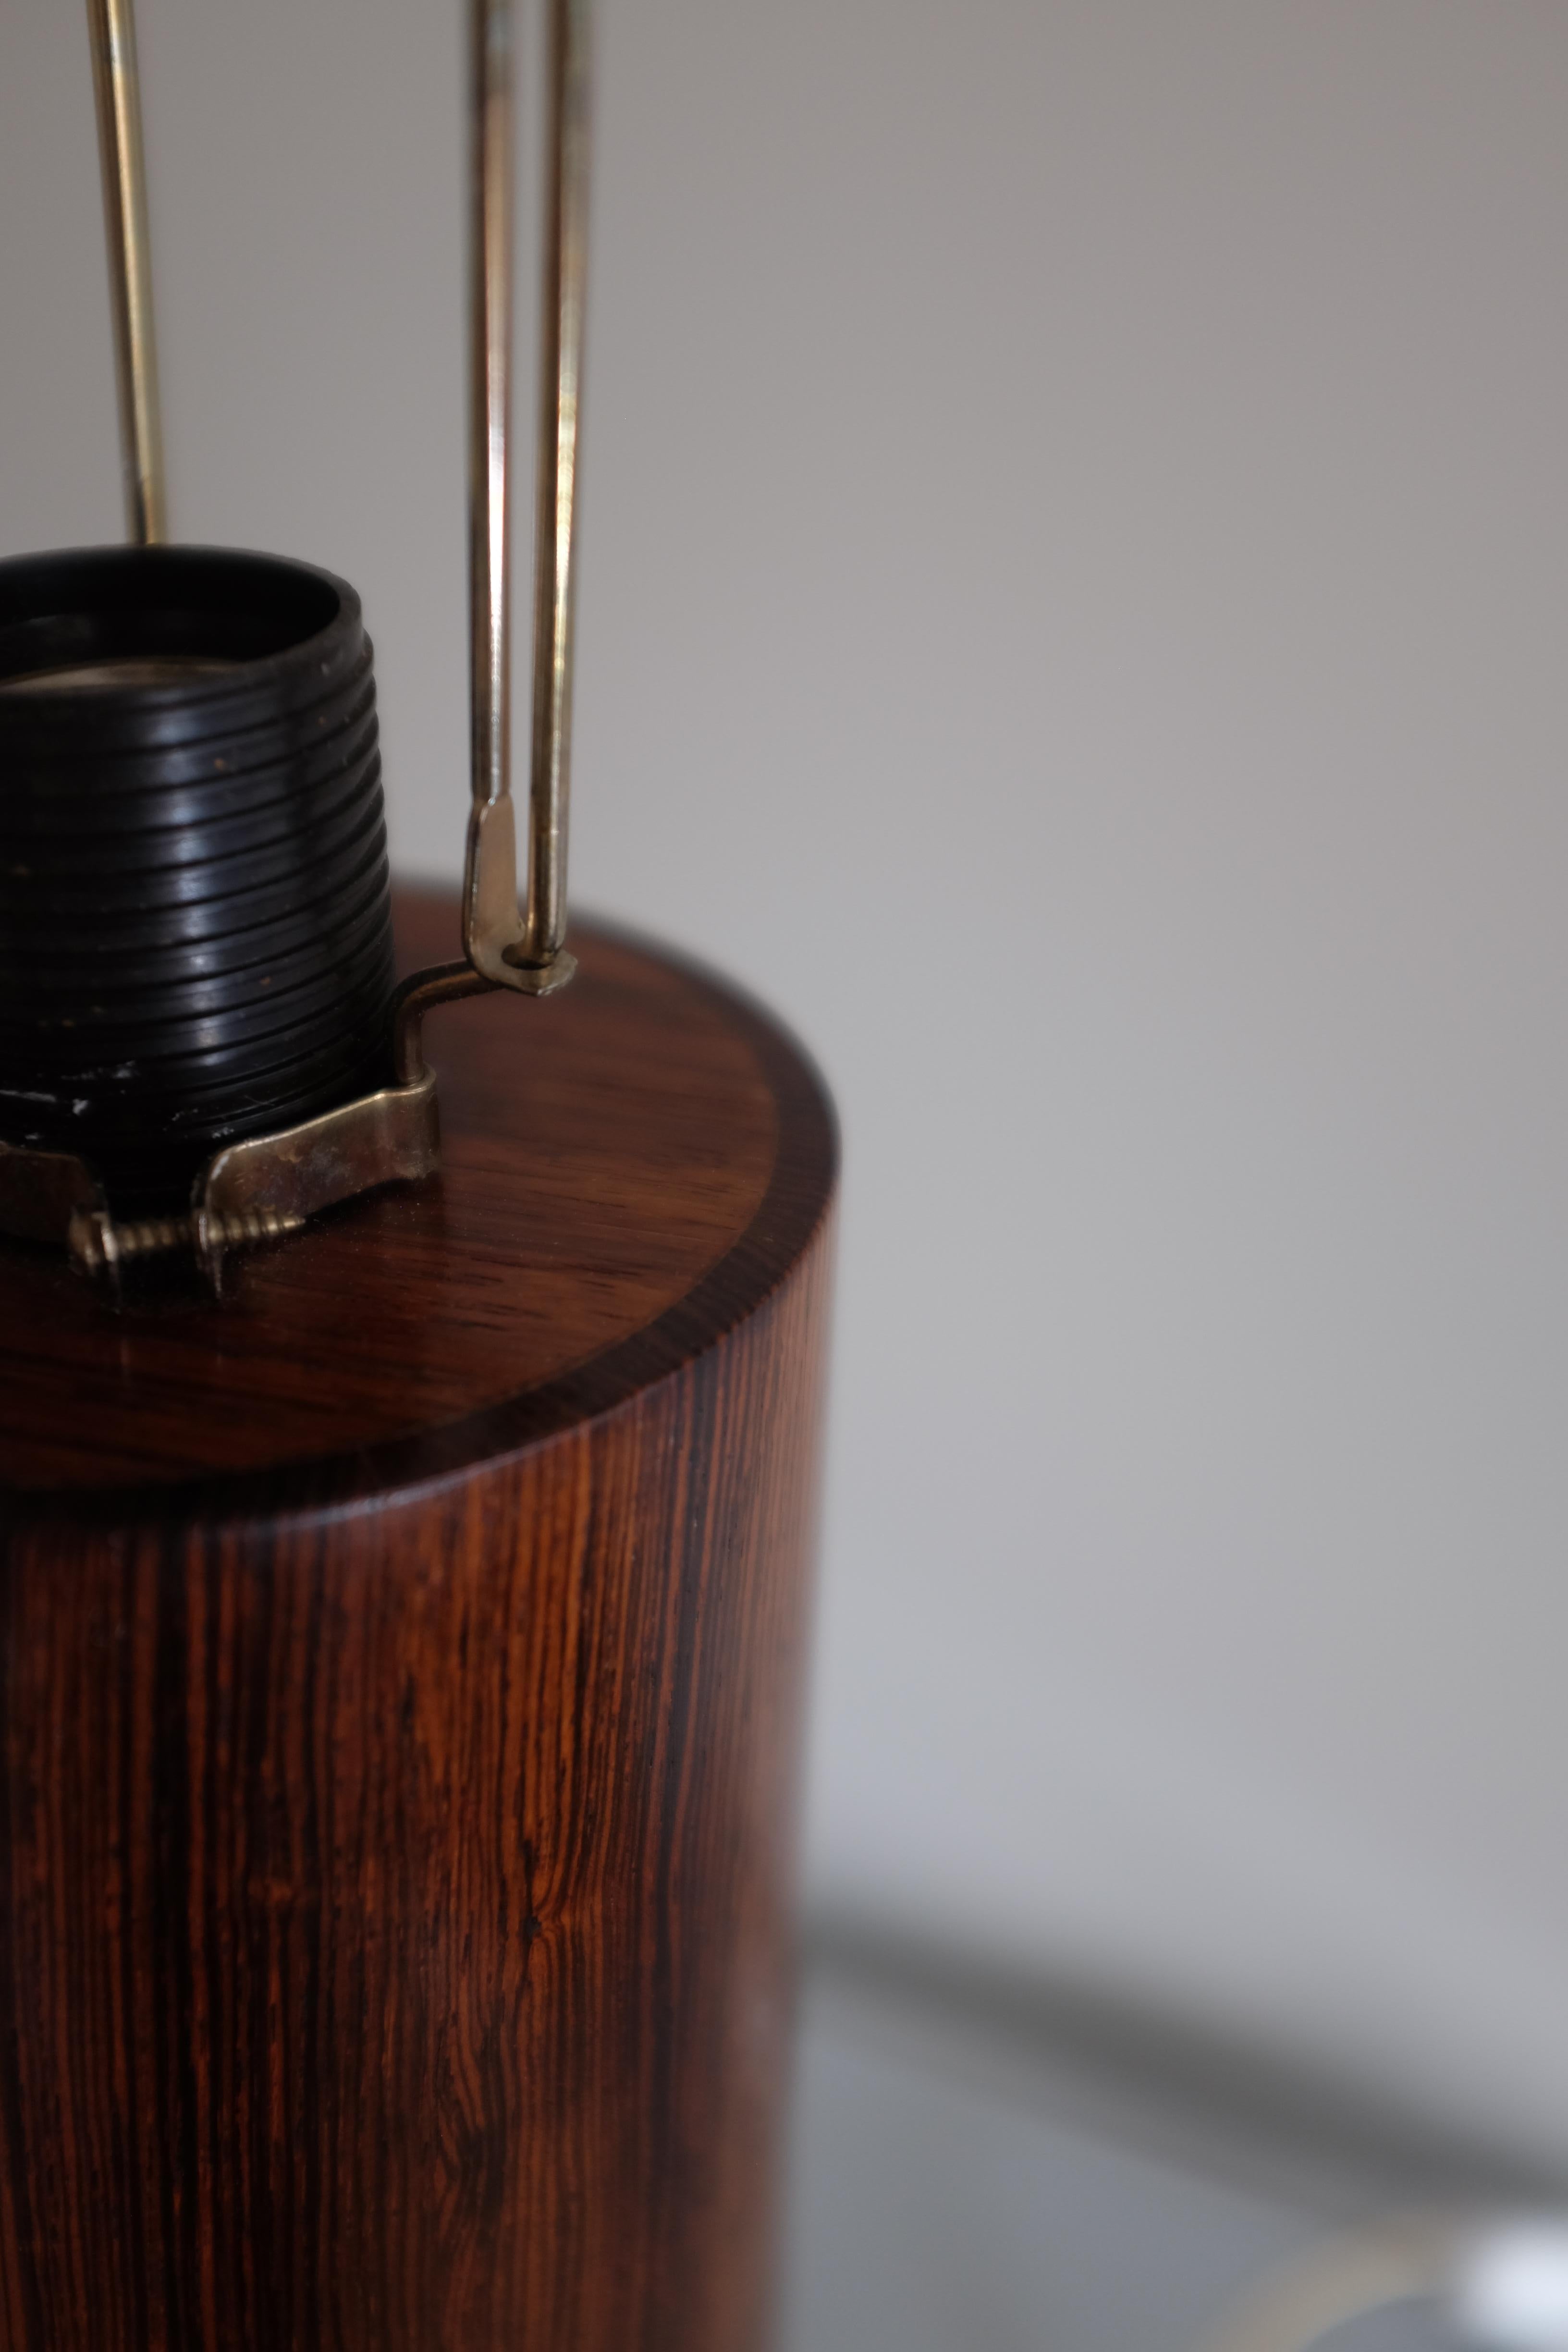 Impressive Rosewood table lamp designed by Luxus Vittsjö, Sweden. Cylindric rosewood lamp base with makers label visible. In a very good condition with few signs of wear. Sold without the lamp shade.

Dimensions: H 22.7 in. x W 4.25 in (including